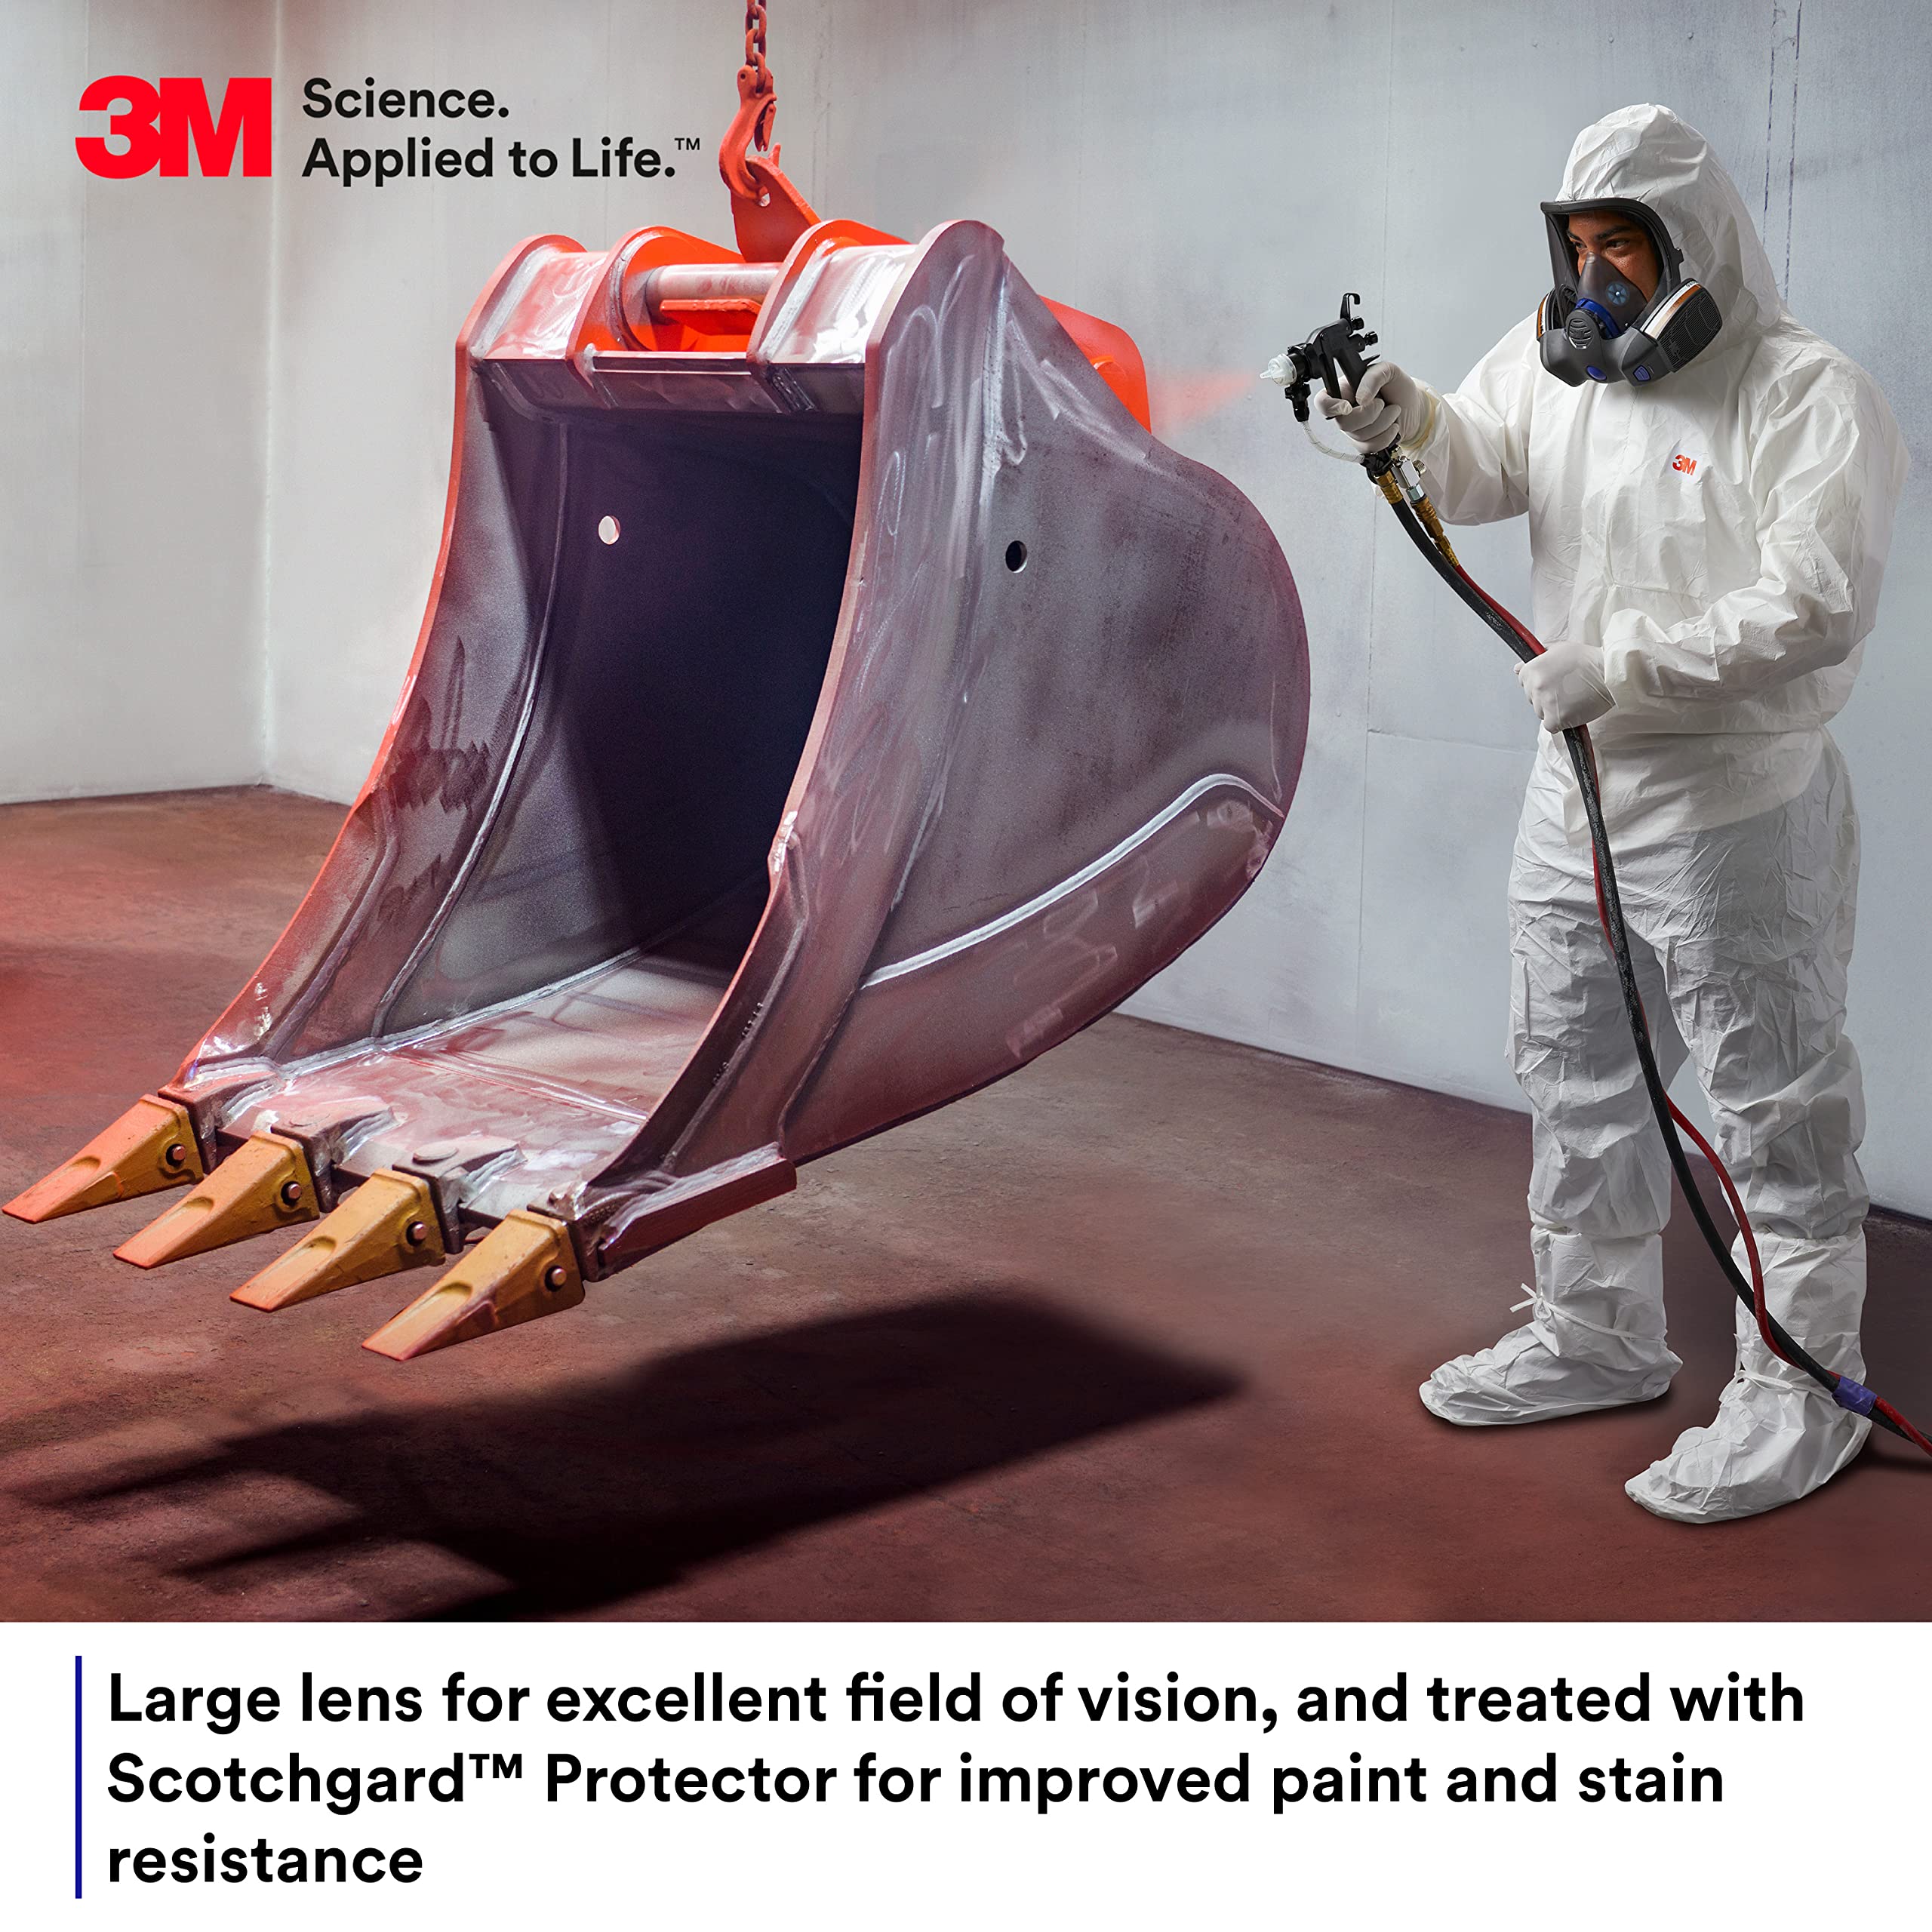 3M Secure Click Full Face Reusable Respirator with Large Lens, Speaking Diaphragm and Push Button Seal Check, FF-801, Painting, Sanding, Chemical Clean-up, Sawing, Small